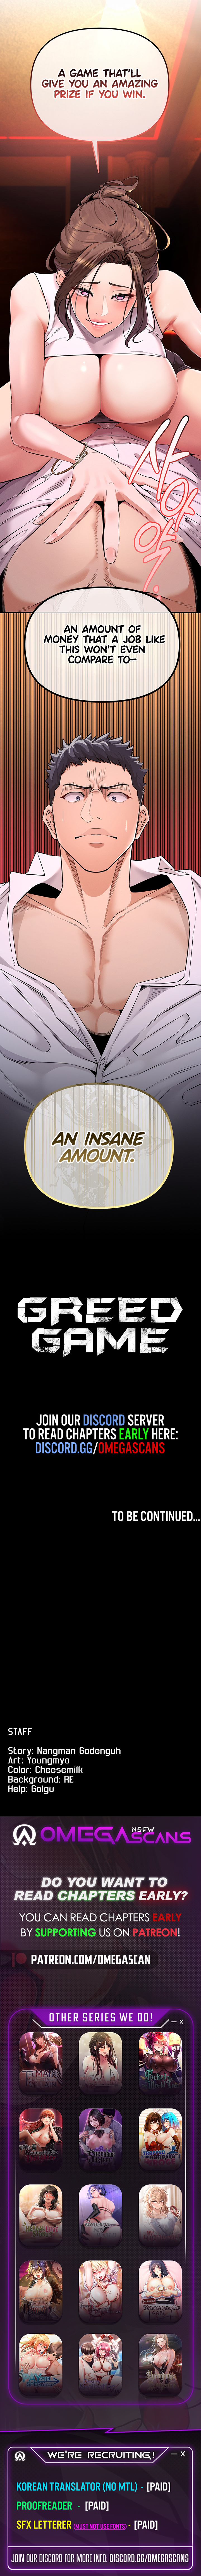 Greed Game NEW image